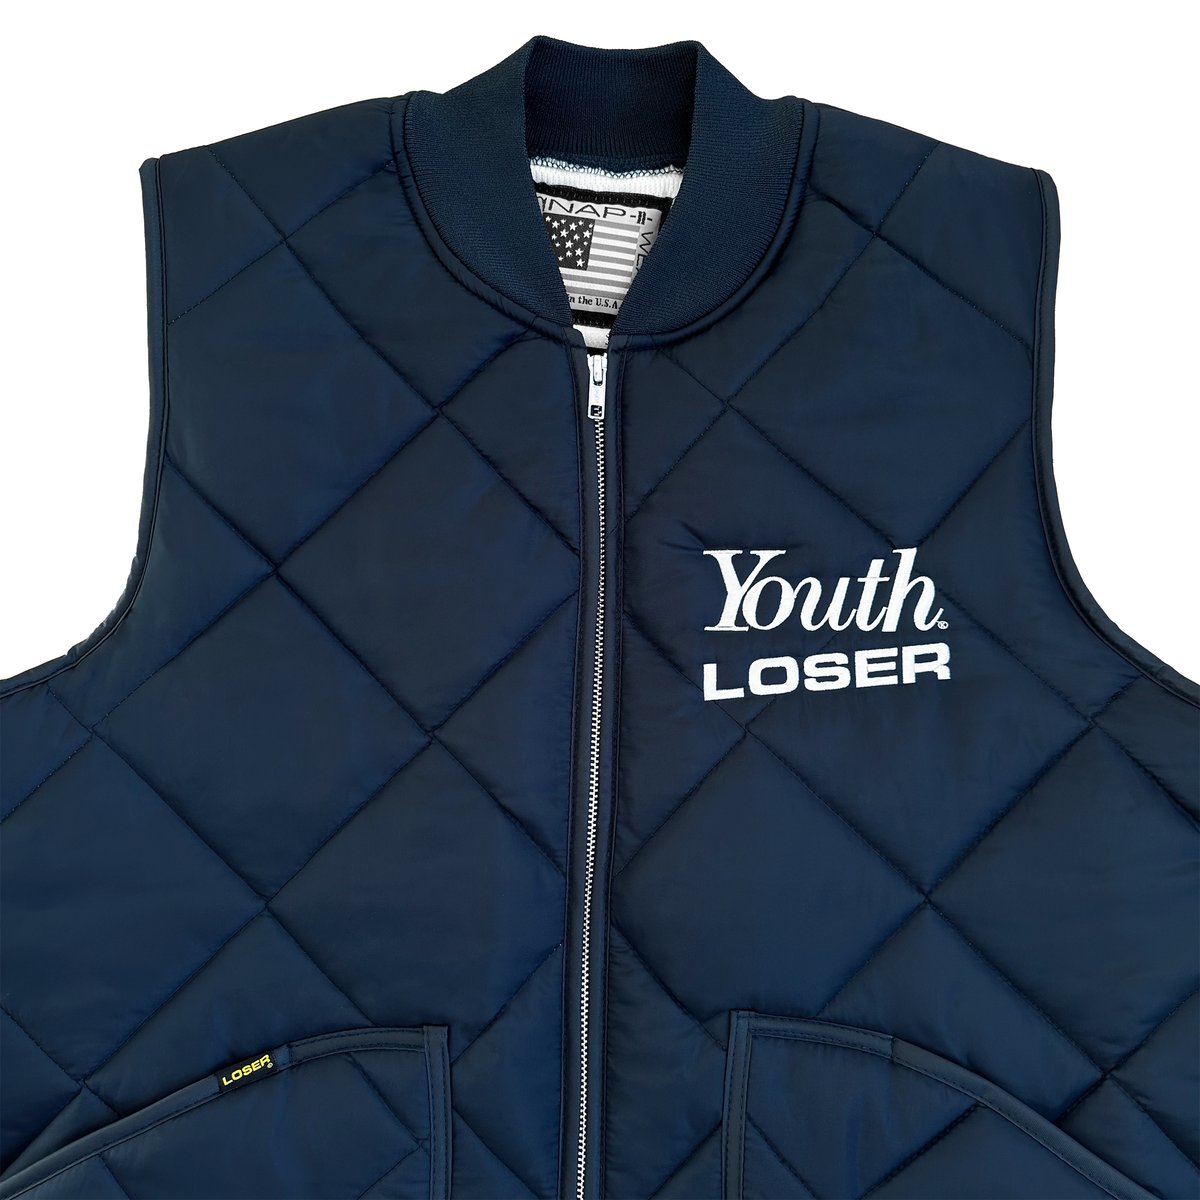 youth loser × special guest ベスト ウエステッドユース 新品 / 正規